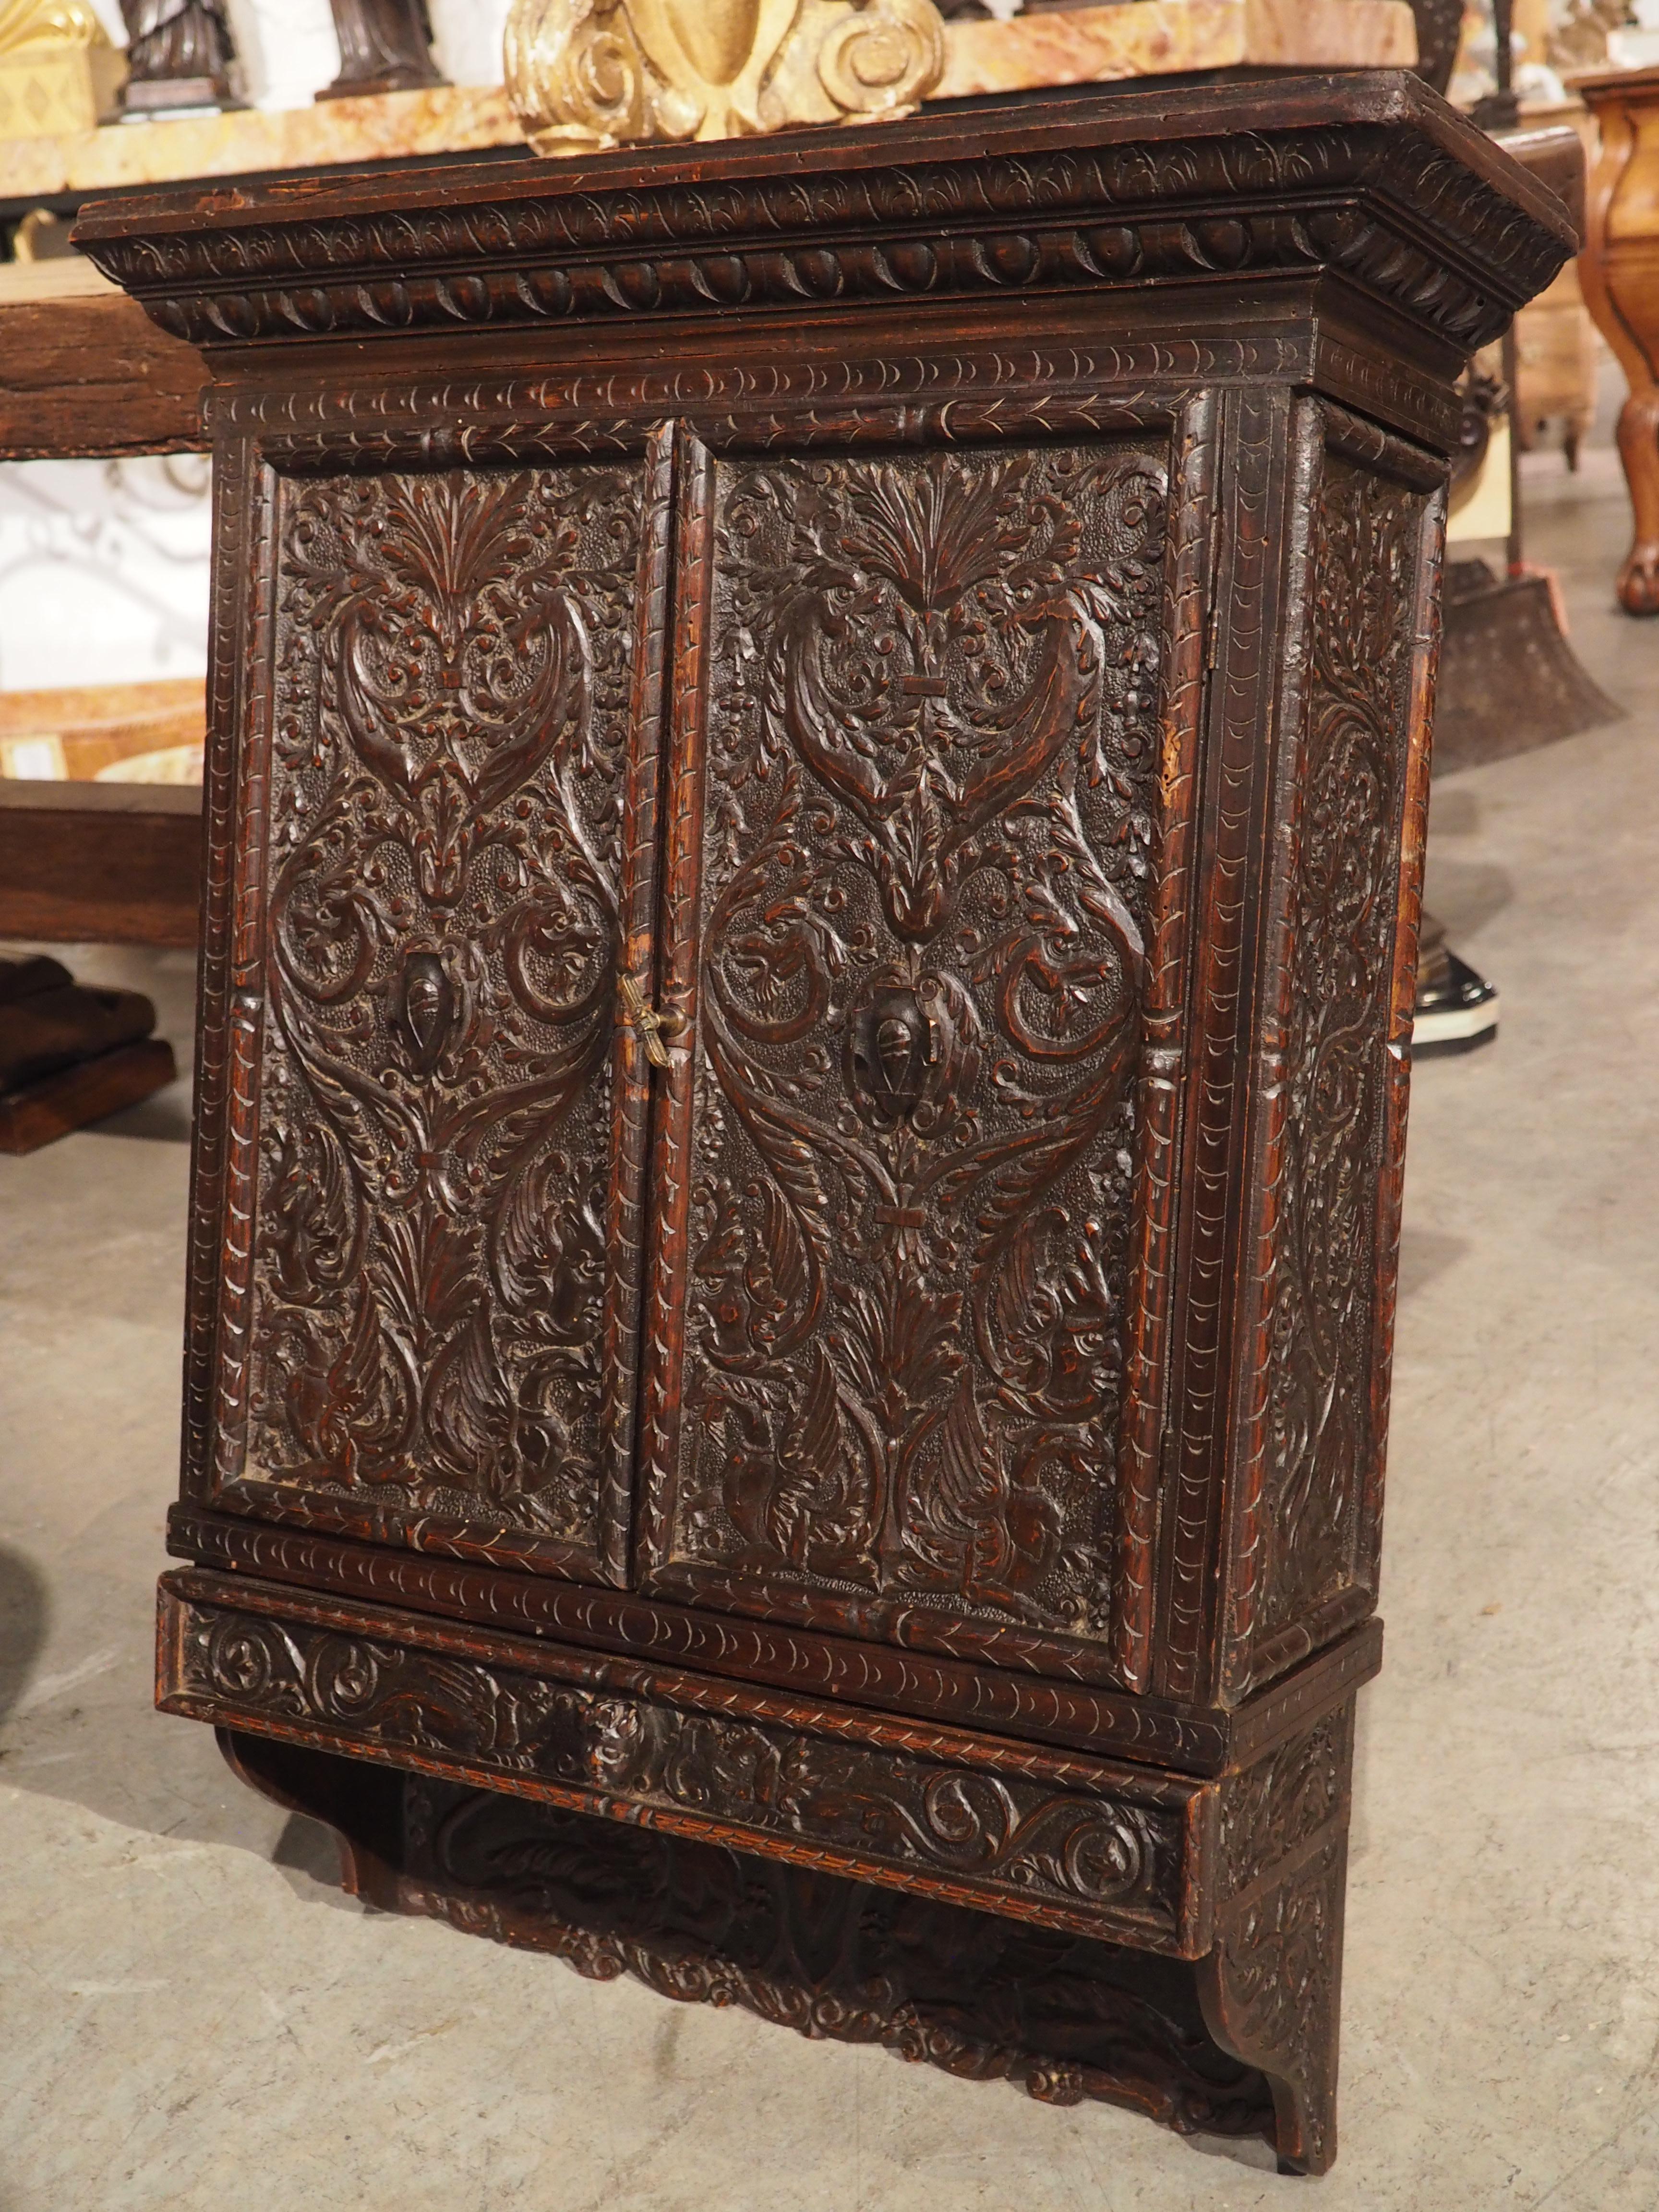 Hand-carved in Italy, circa 1830, this walnut wall cabinet has numerous Renaissance style motifs. The details are quite amazing, with all available space utilized. Even the edges of the two full length shelves have been adorned with recessed niches